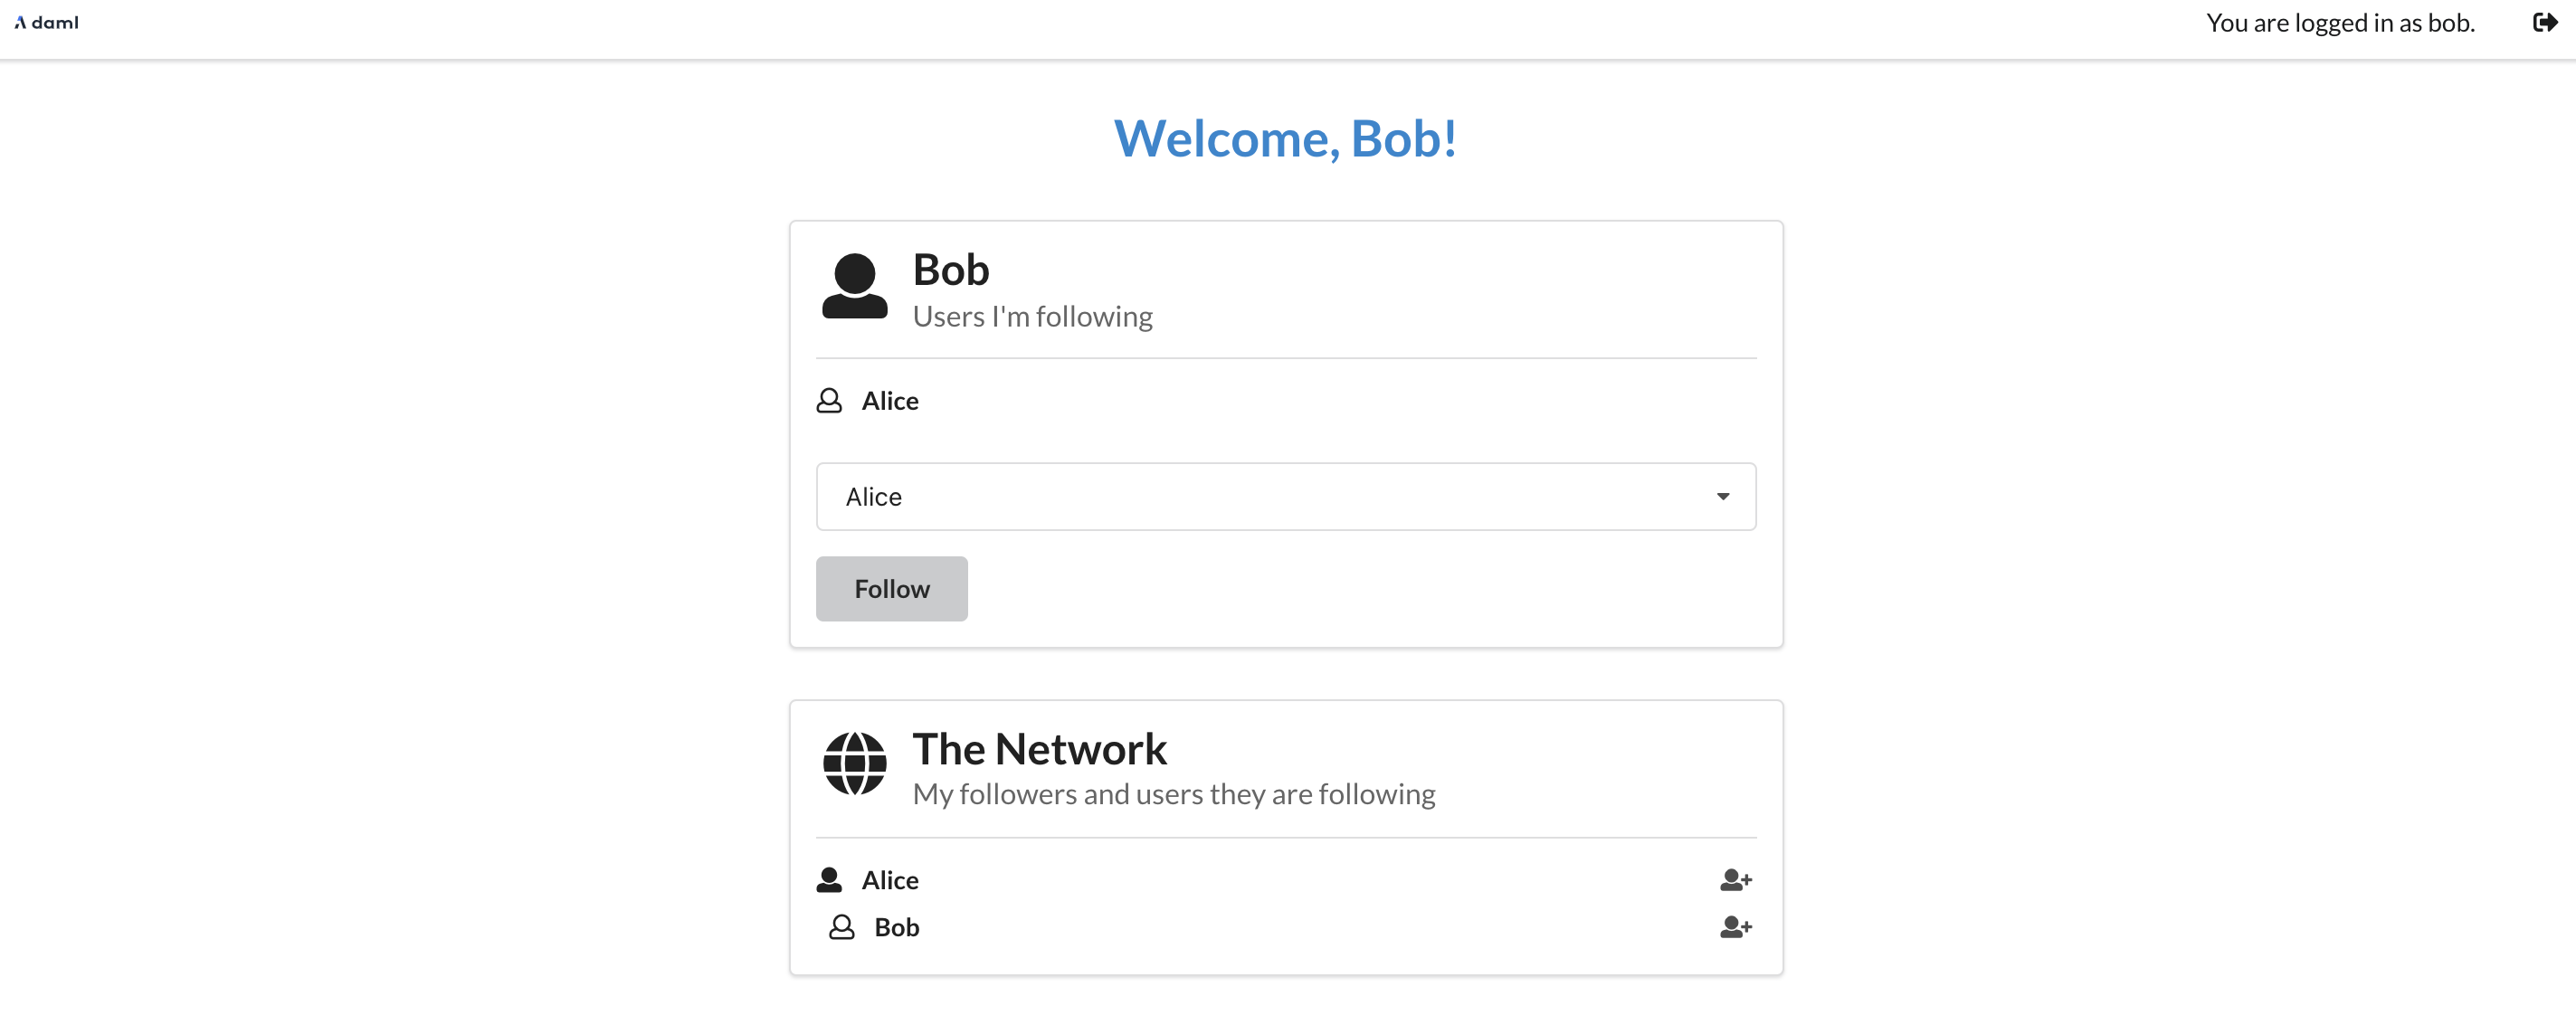 The app now shows Bob the list of users Alice is following in the The Network section.